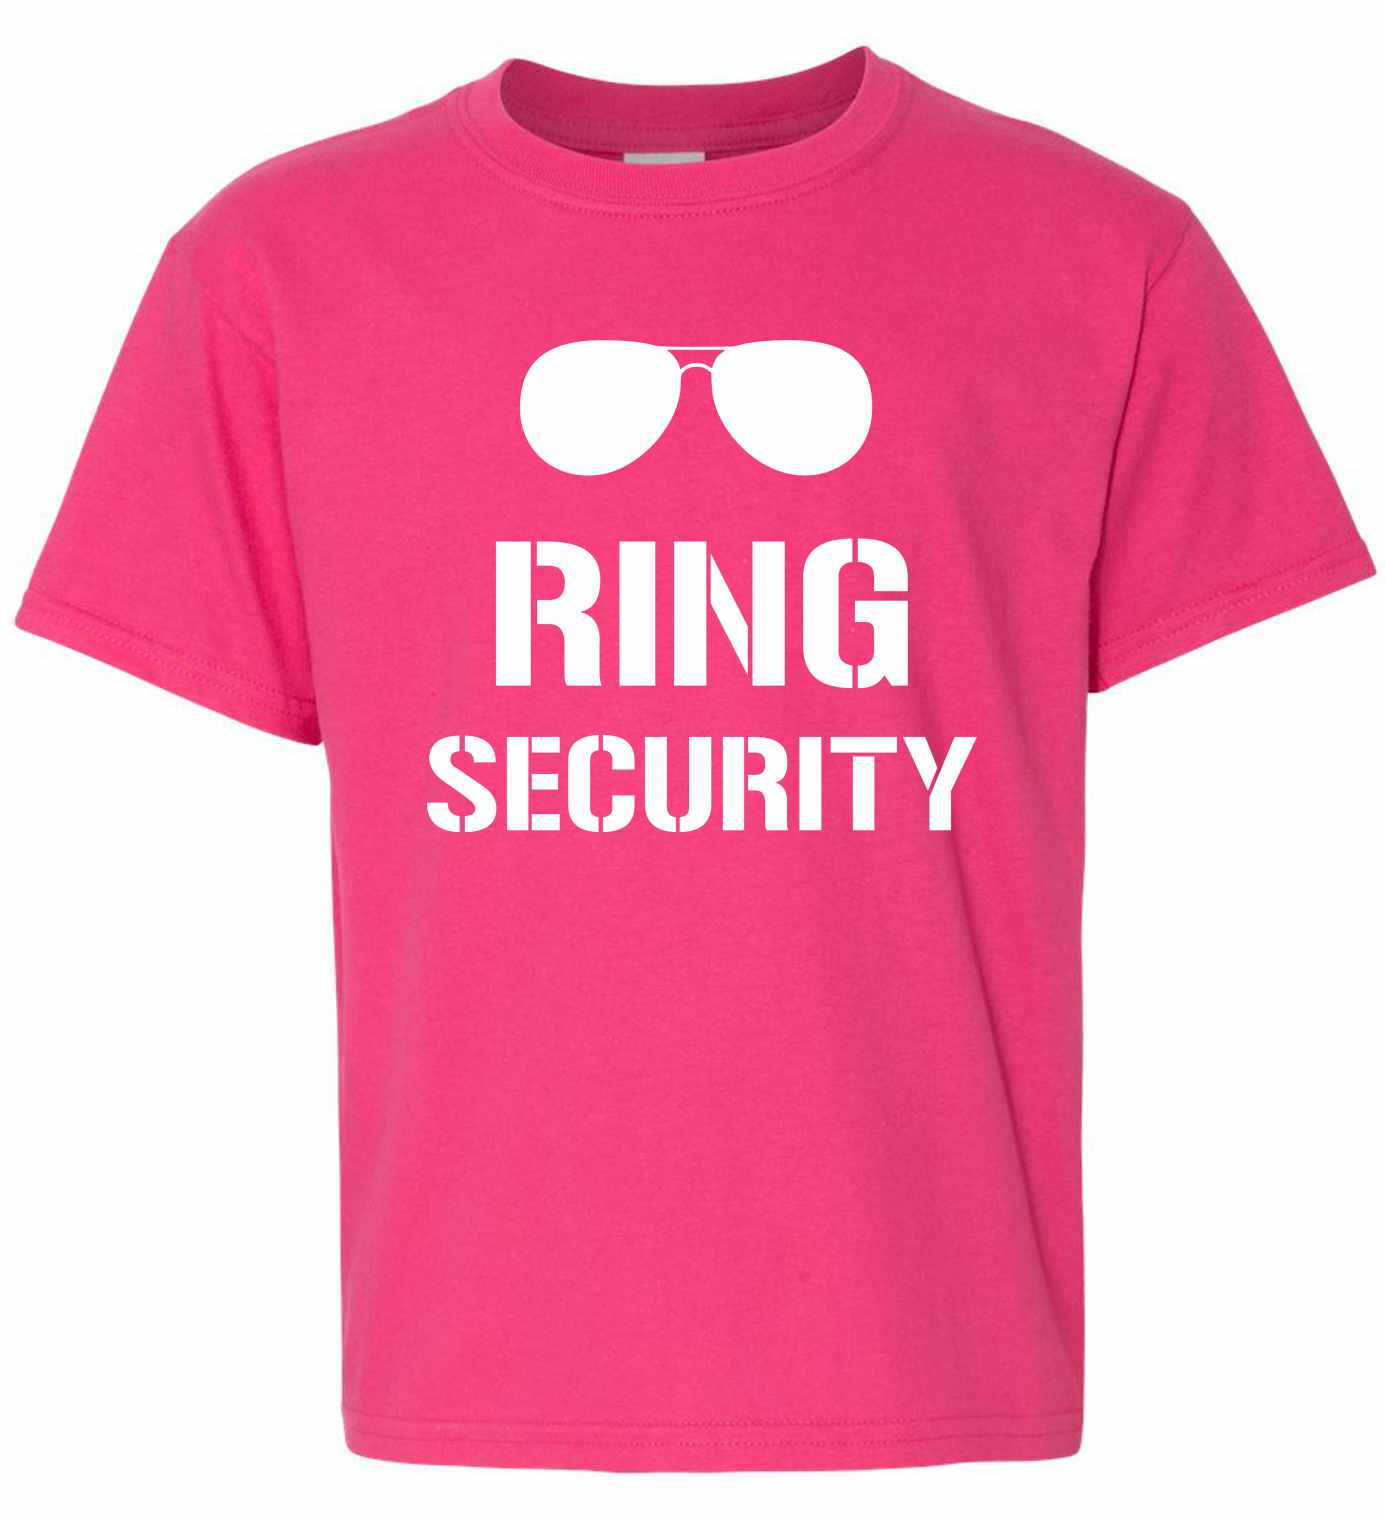 Ring Security on Kids T-Shirt